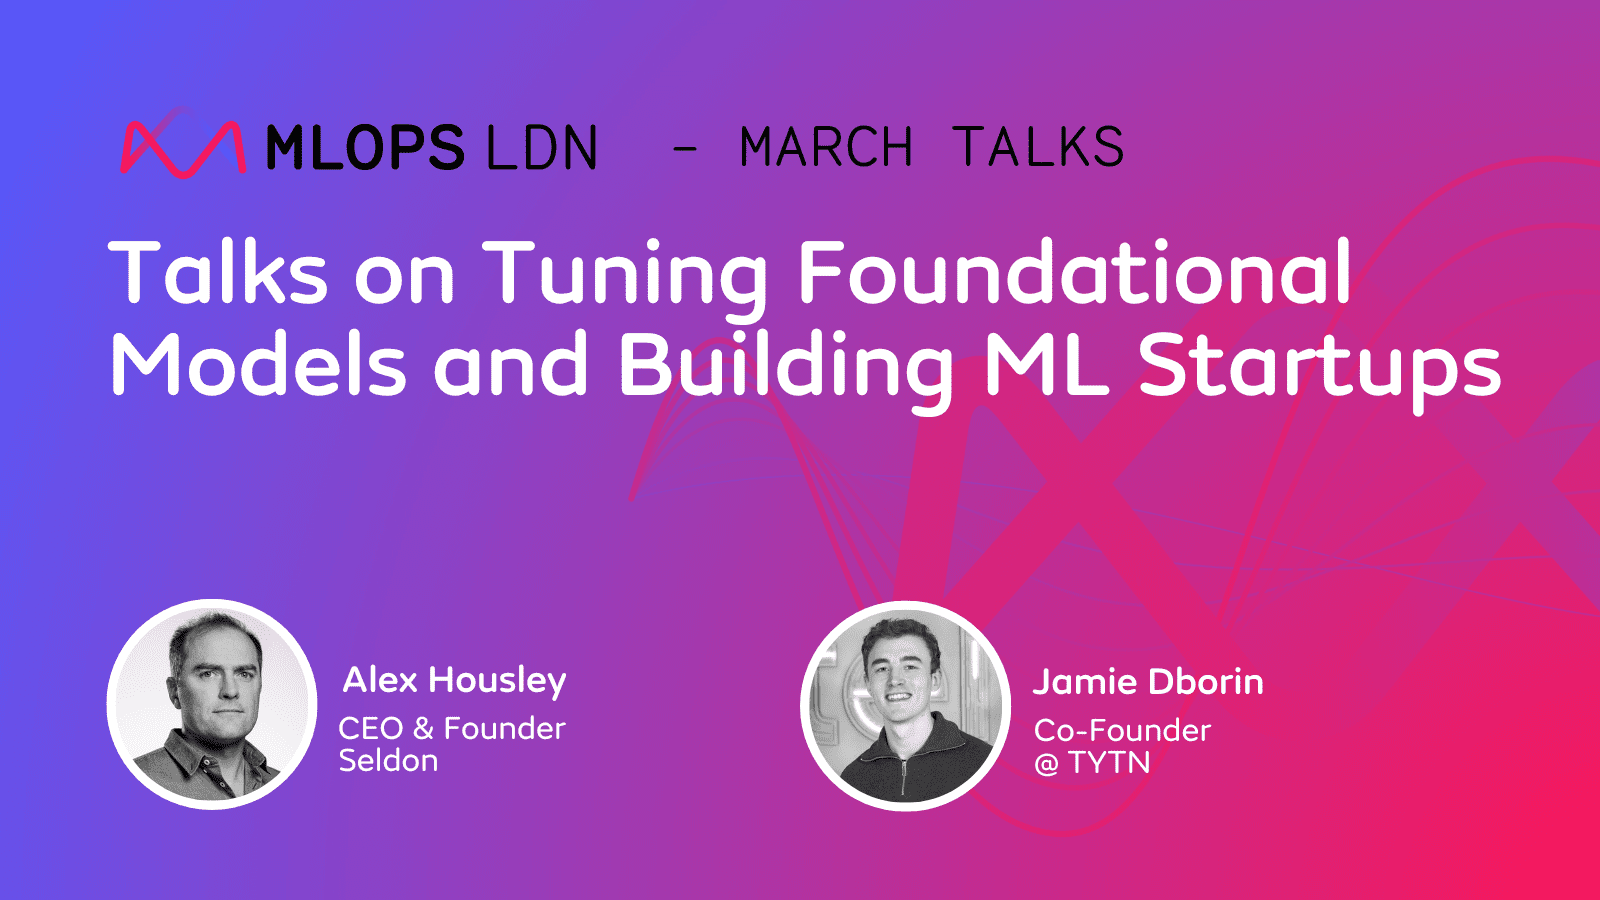 MLOps London March: Talks on Tuning Foundational Models and Building ML Startups